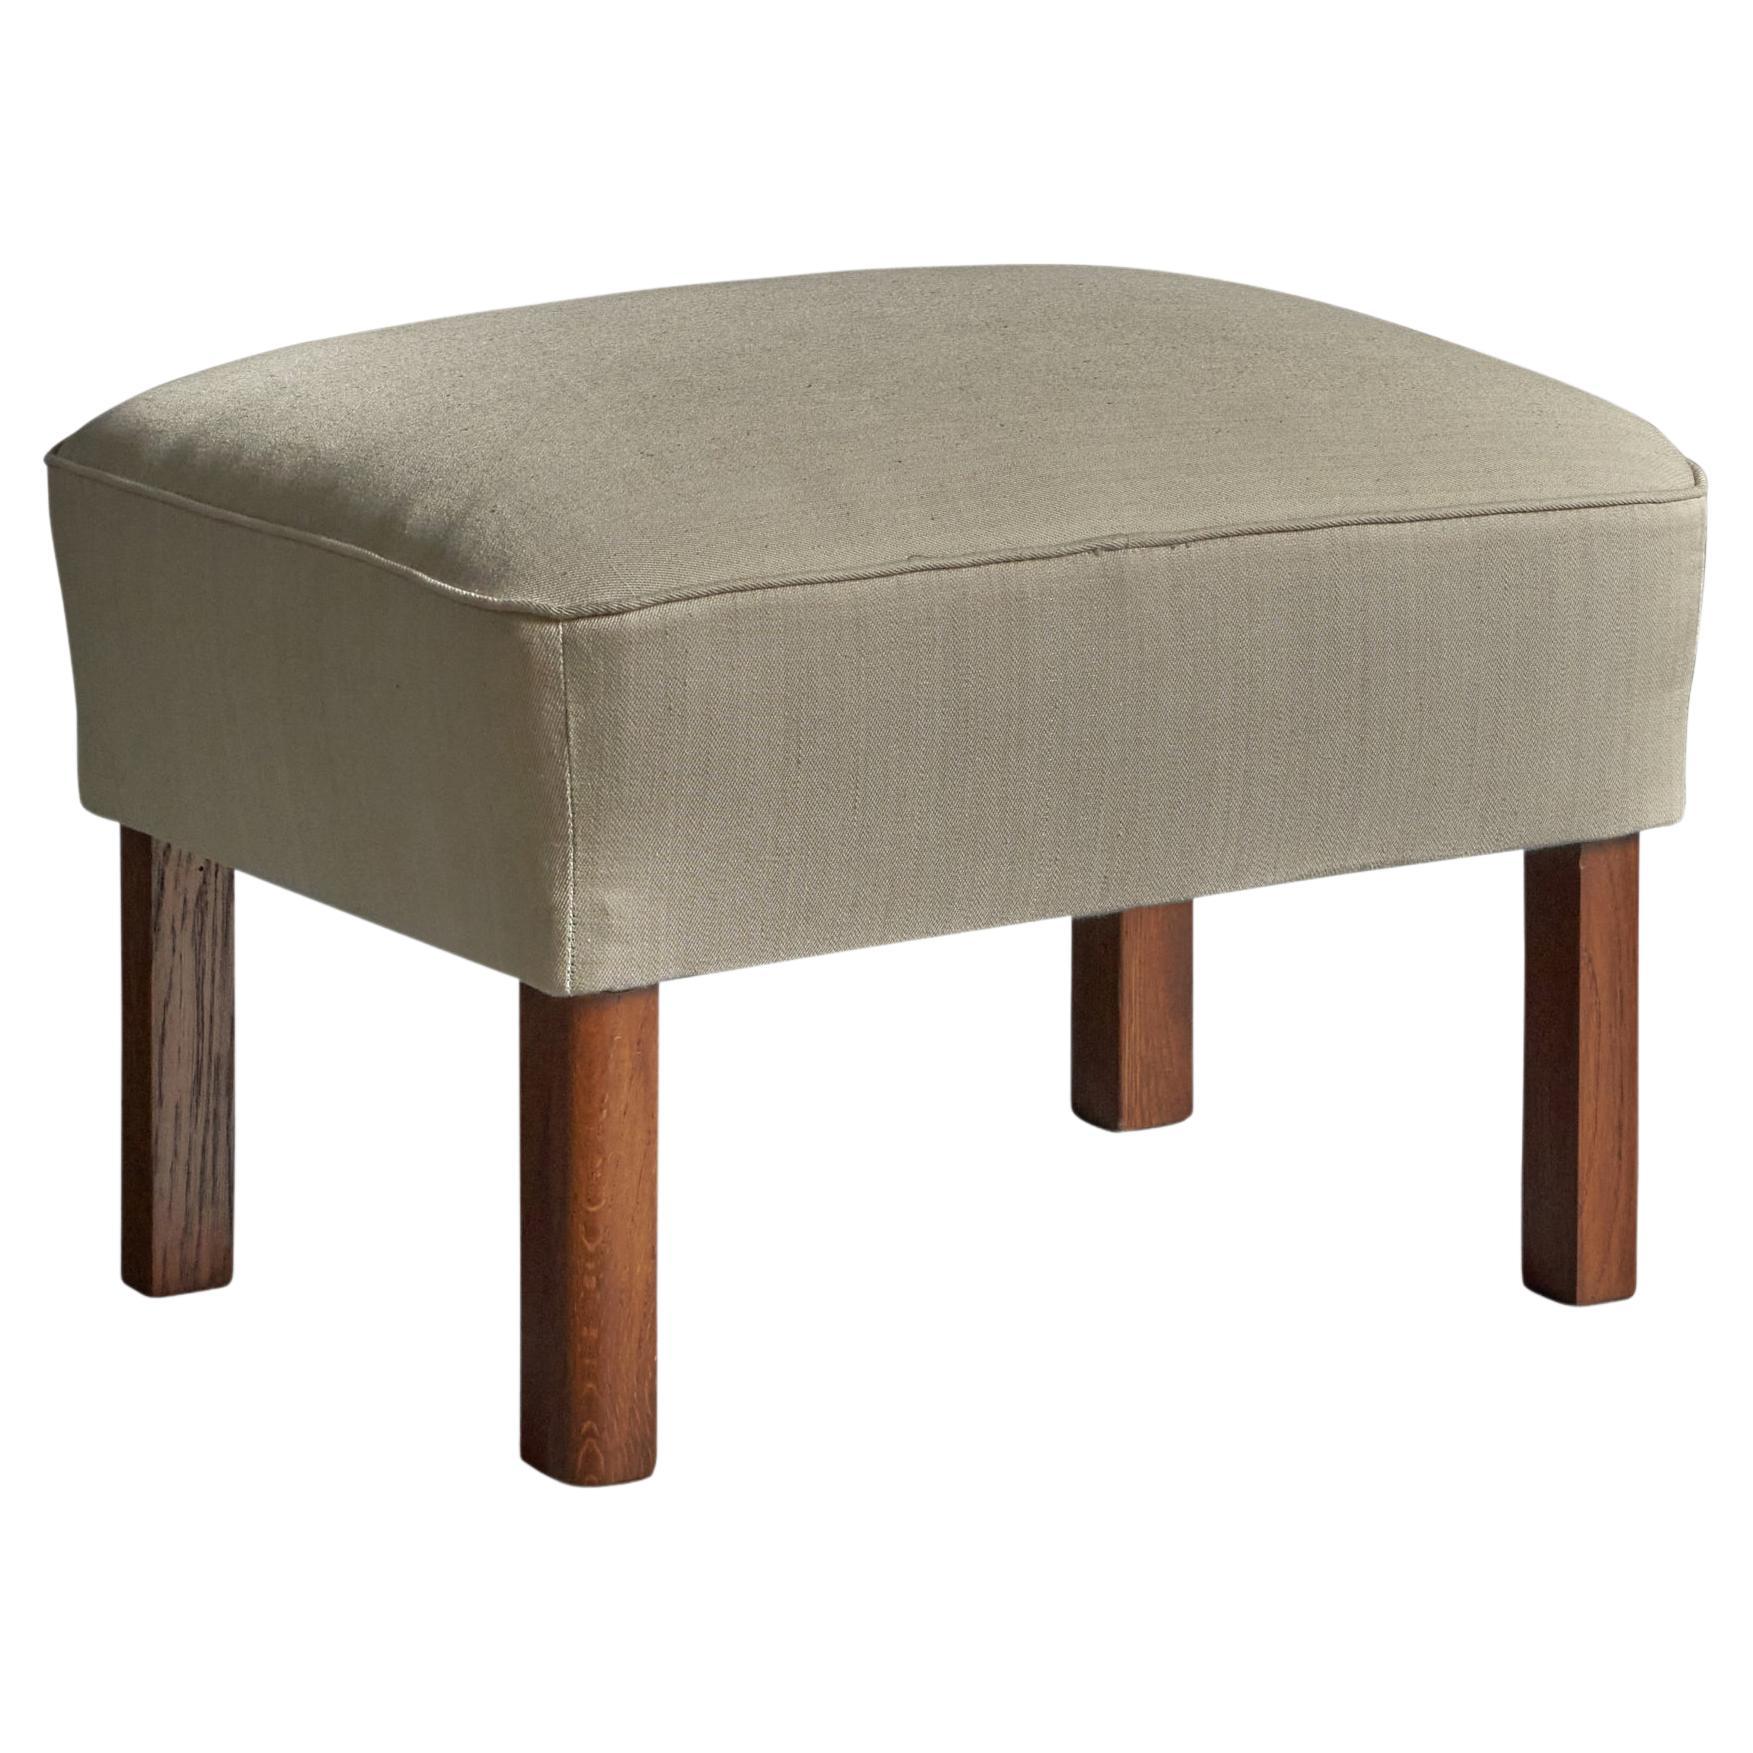 Melchiorre Bega, Stool, Wood, Fabric, Italy, 1930s For Sale